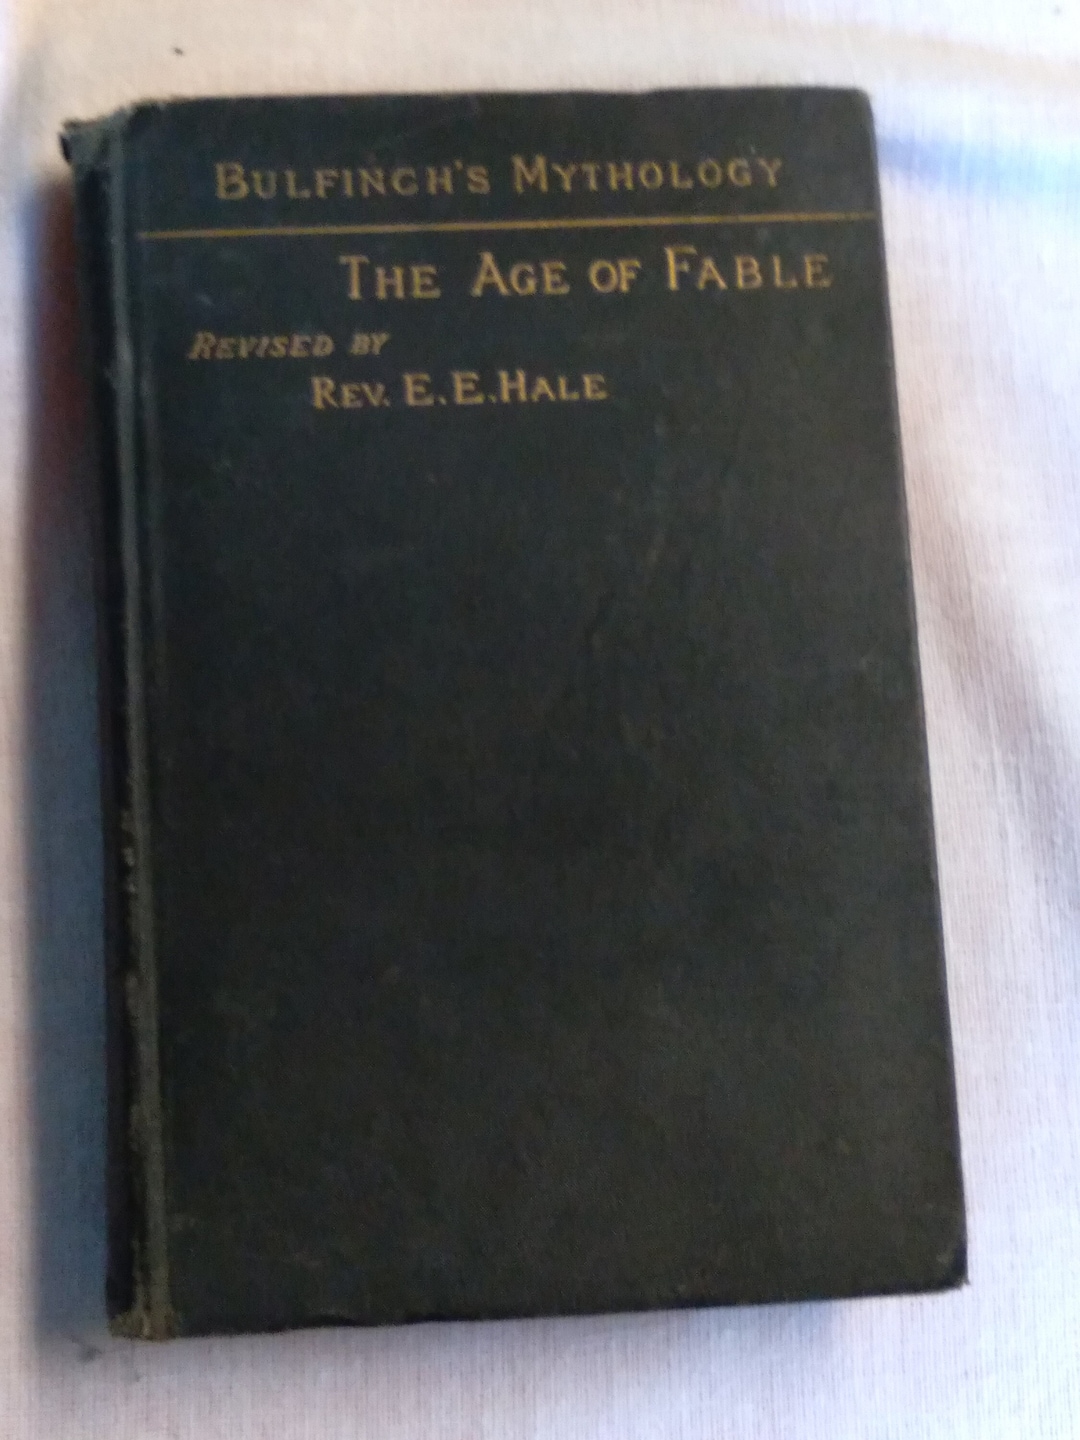 Bulfinch's Mythology the Age of Fable/revised by Rev. E.E. Hale/1881 ...